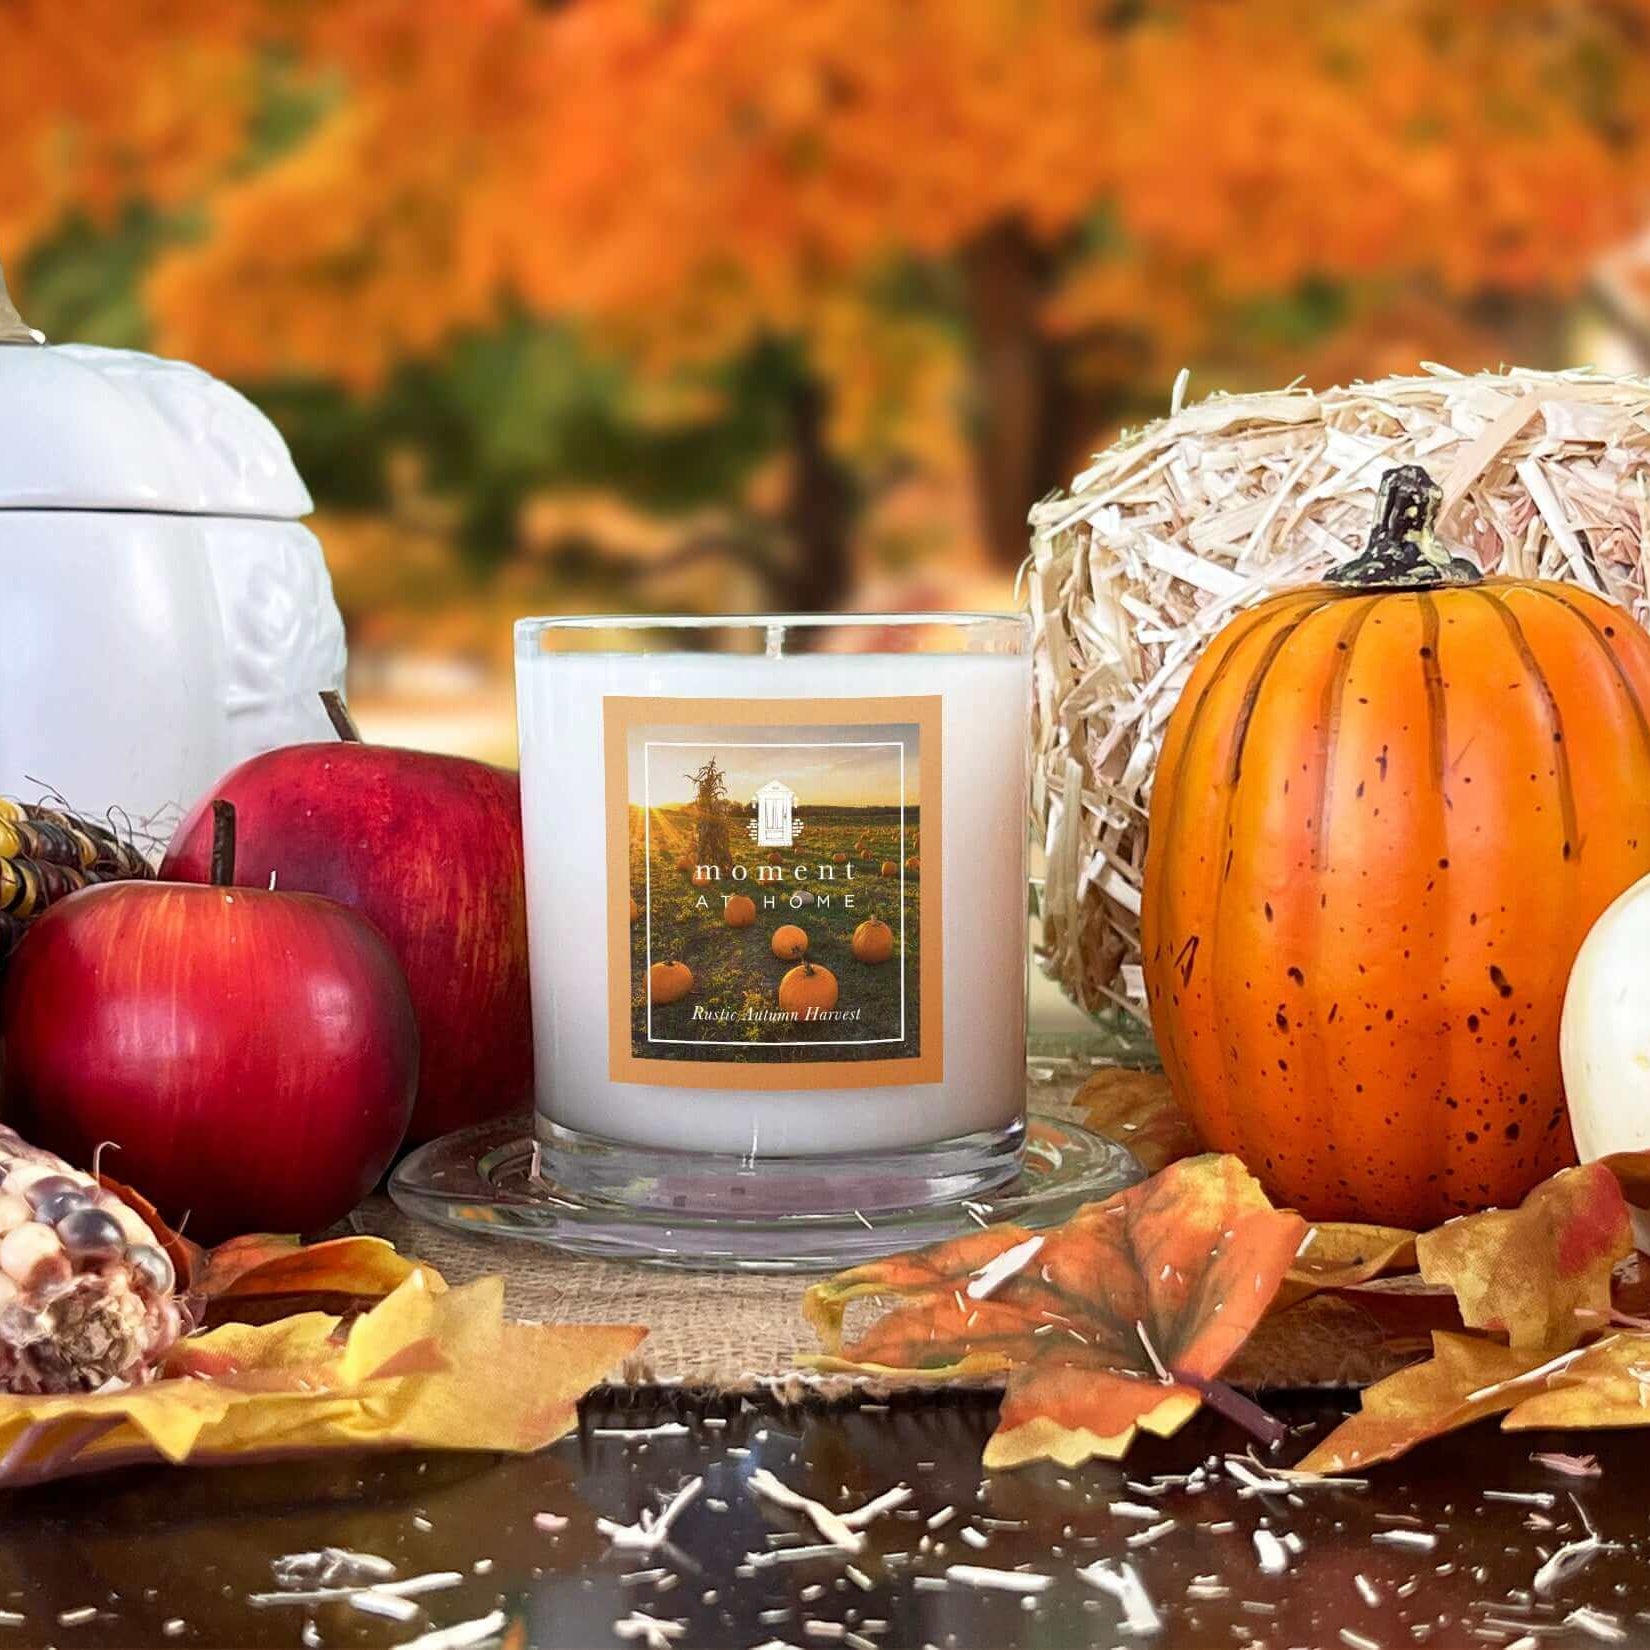 Live your hayride and pumpkin patch fantasies with Rustic Autumn Harvest.